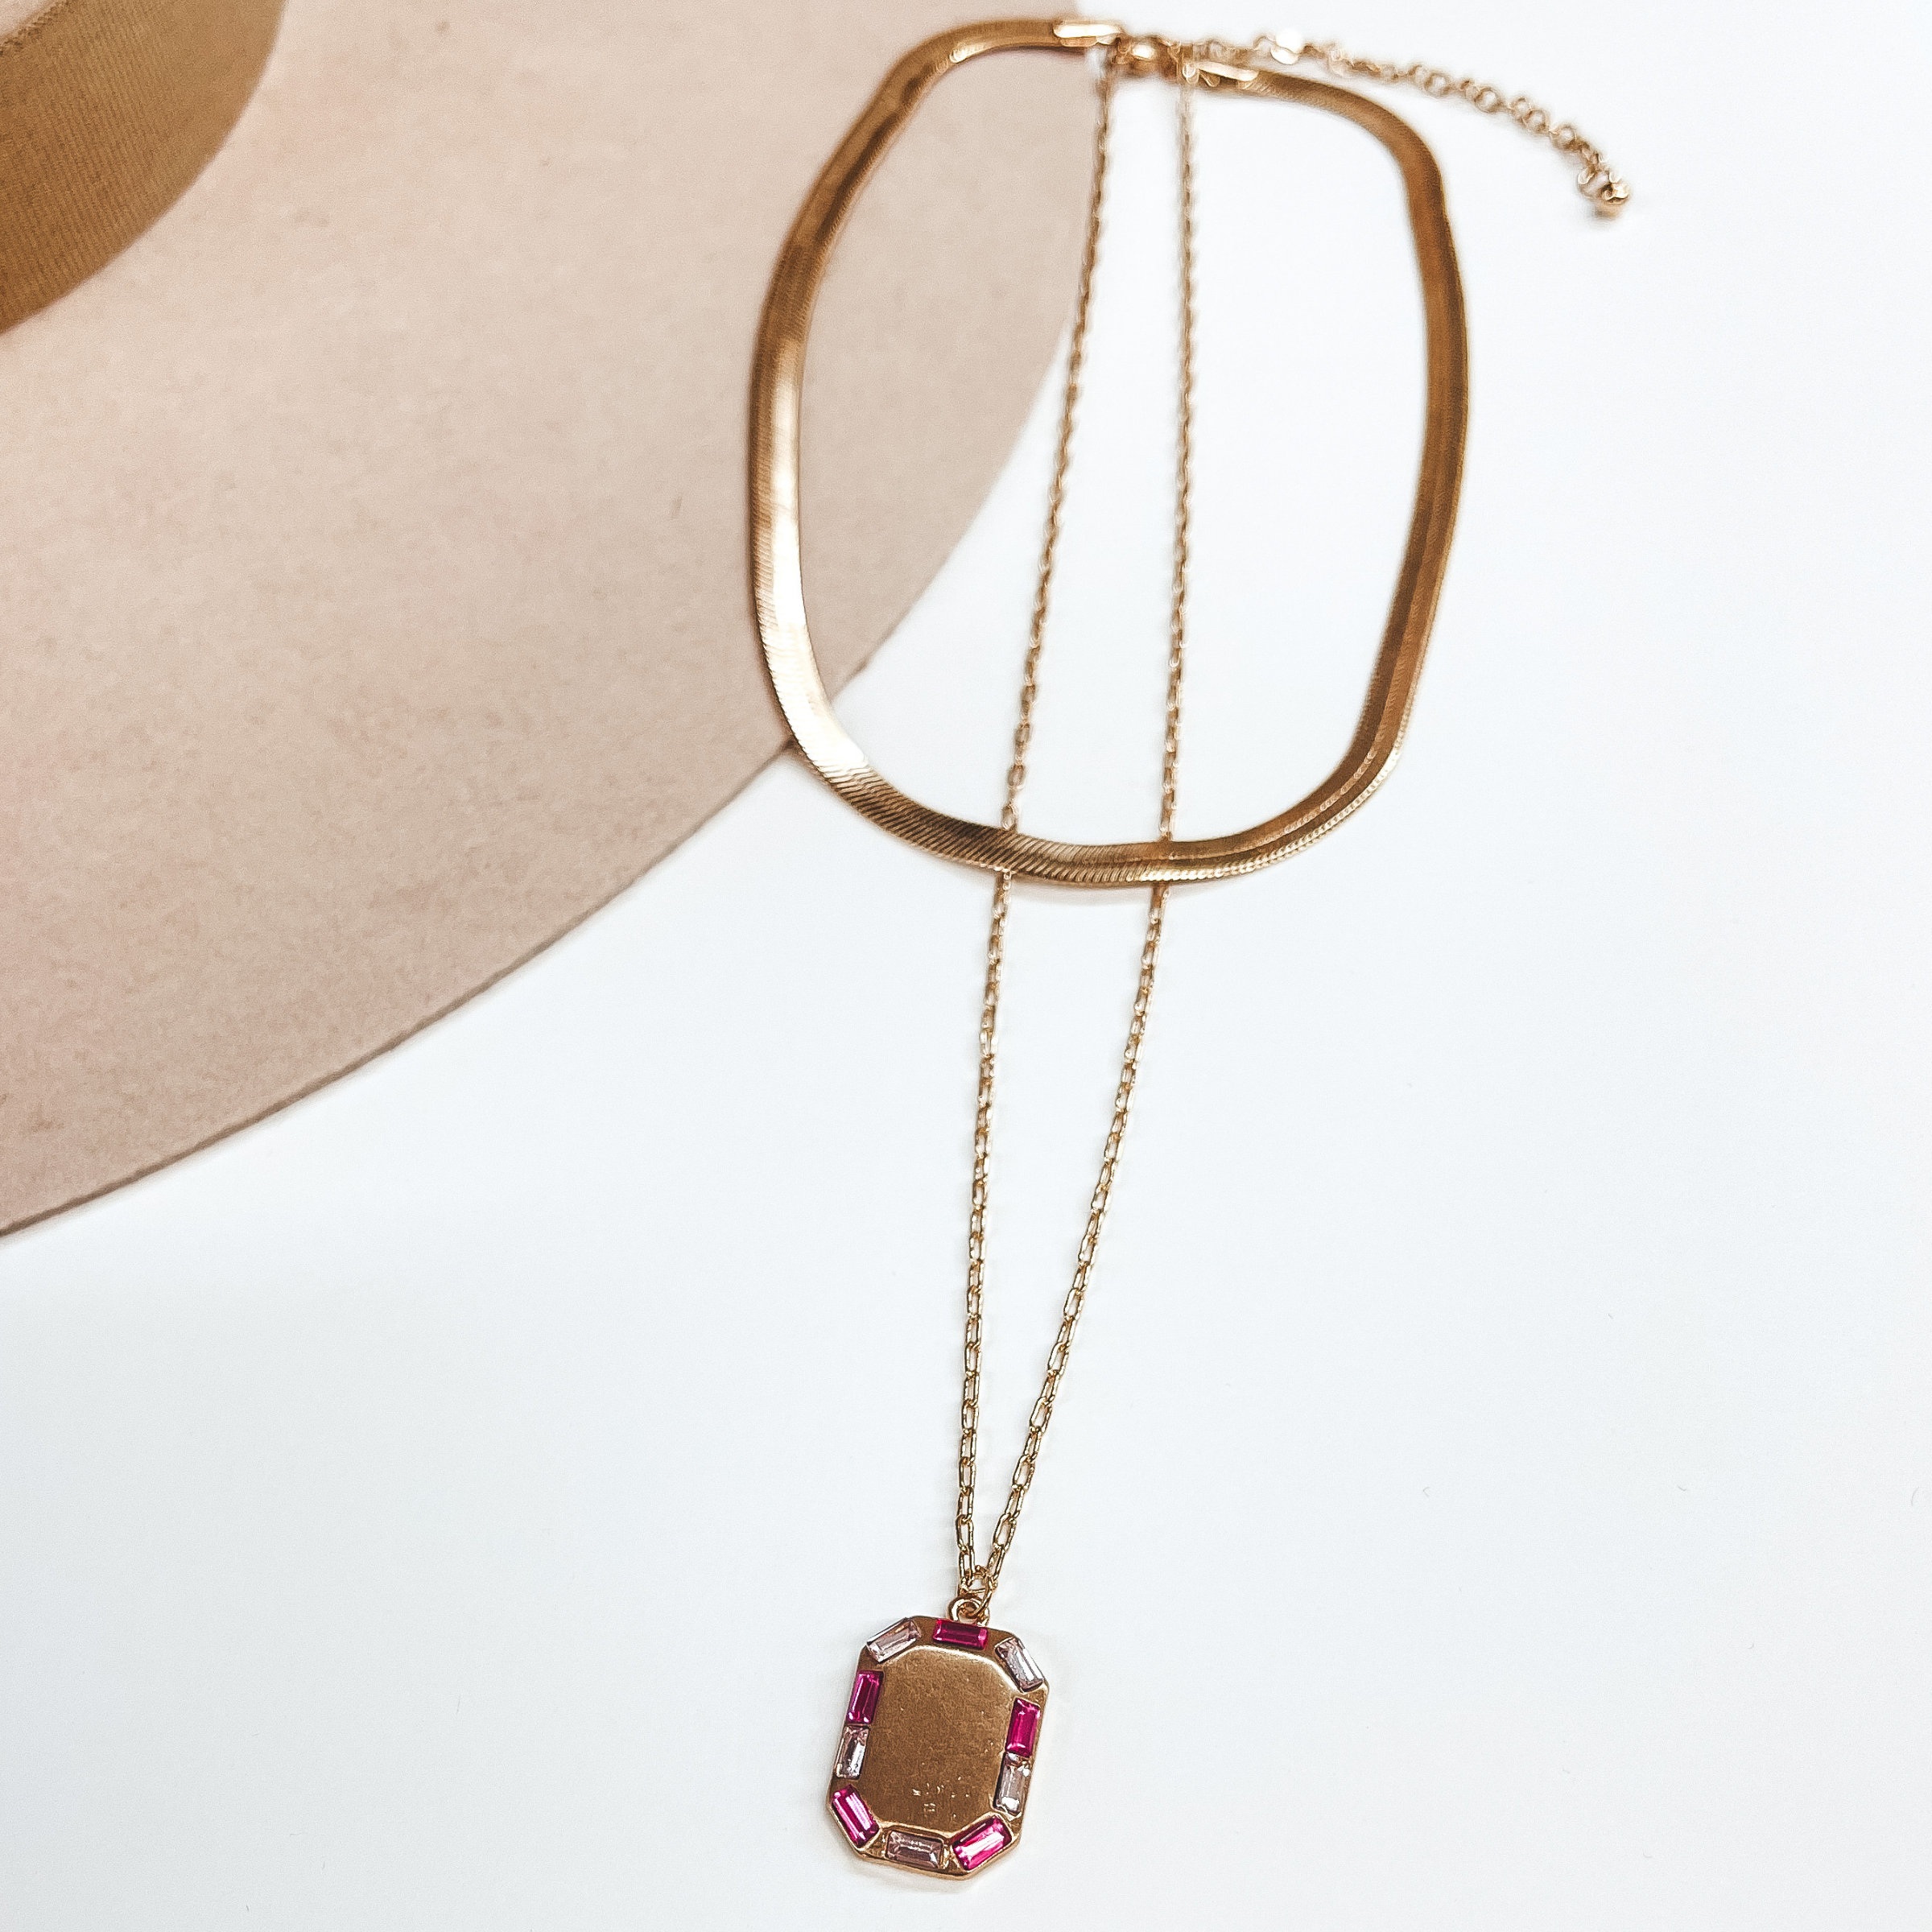 Made For Royalty Herringbone Chain and Gold Tone Necklace with Rectangular Pendant in Pink - Giddy Up Glamour Boutique